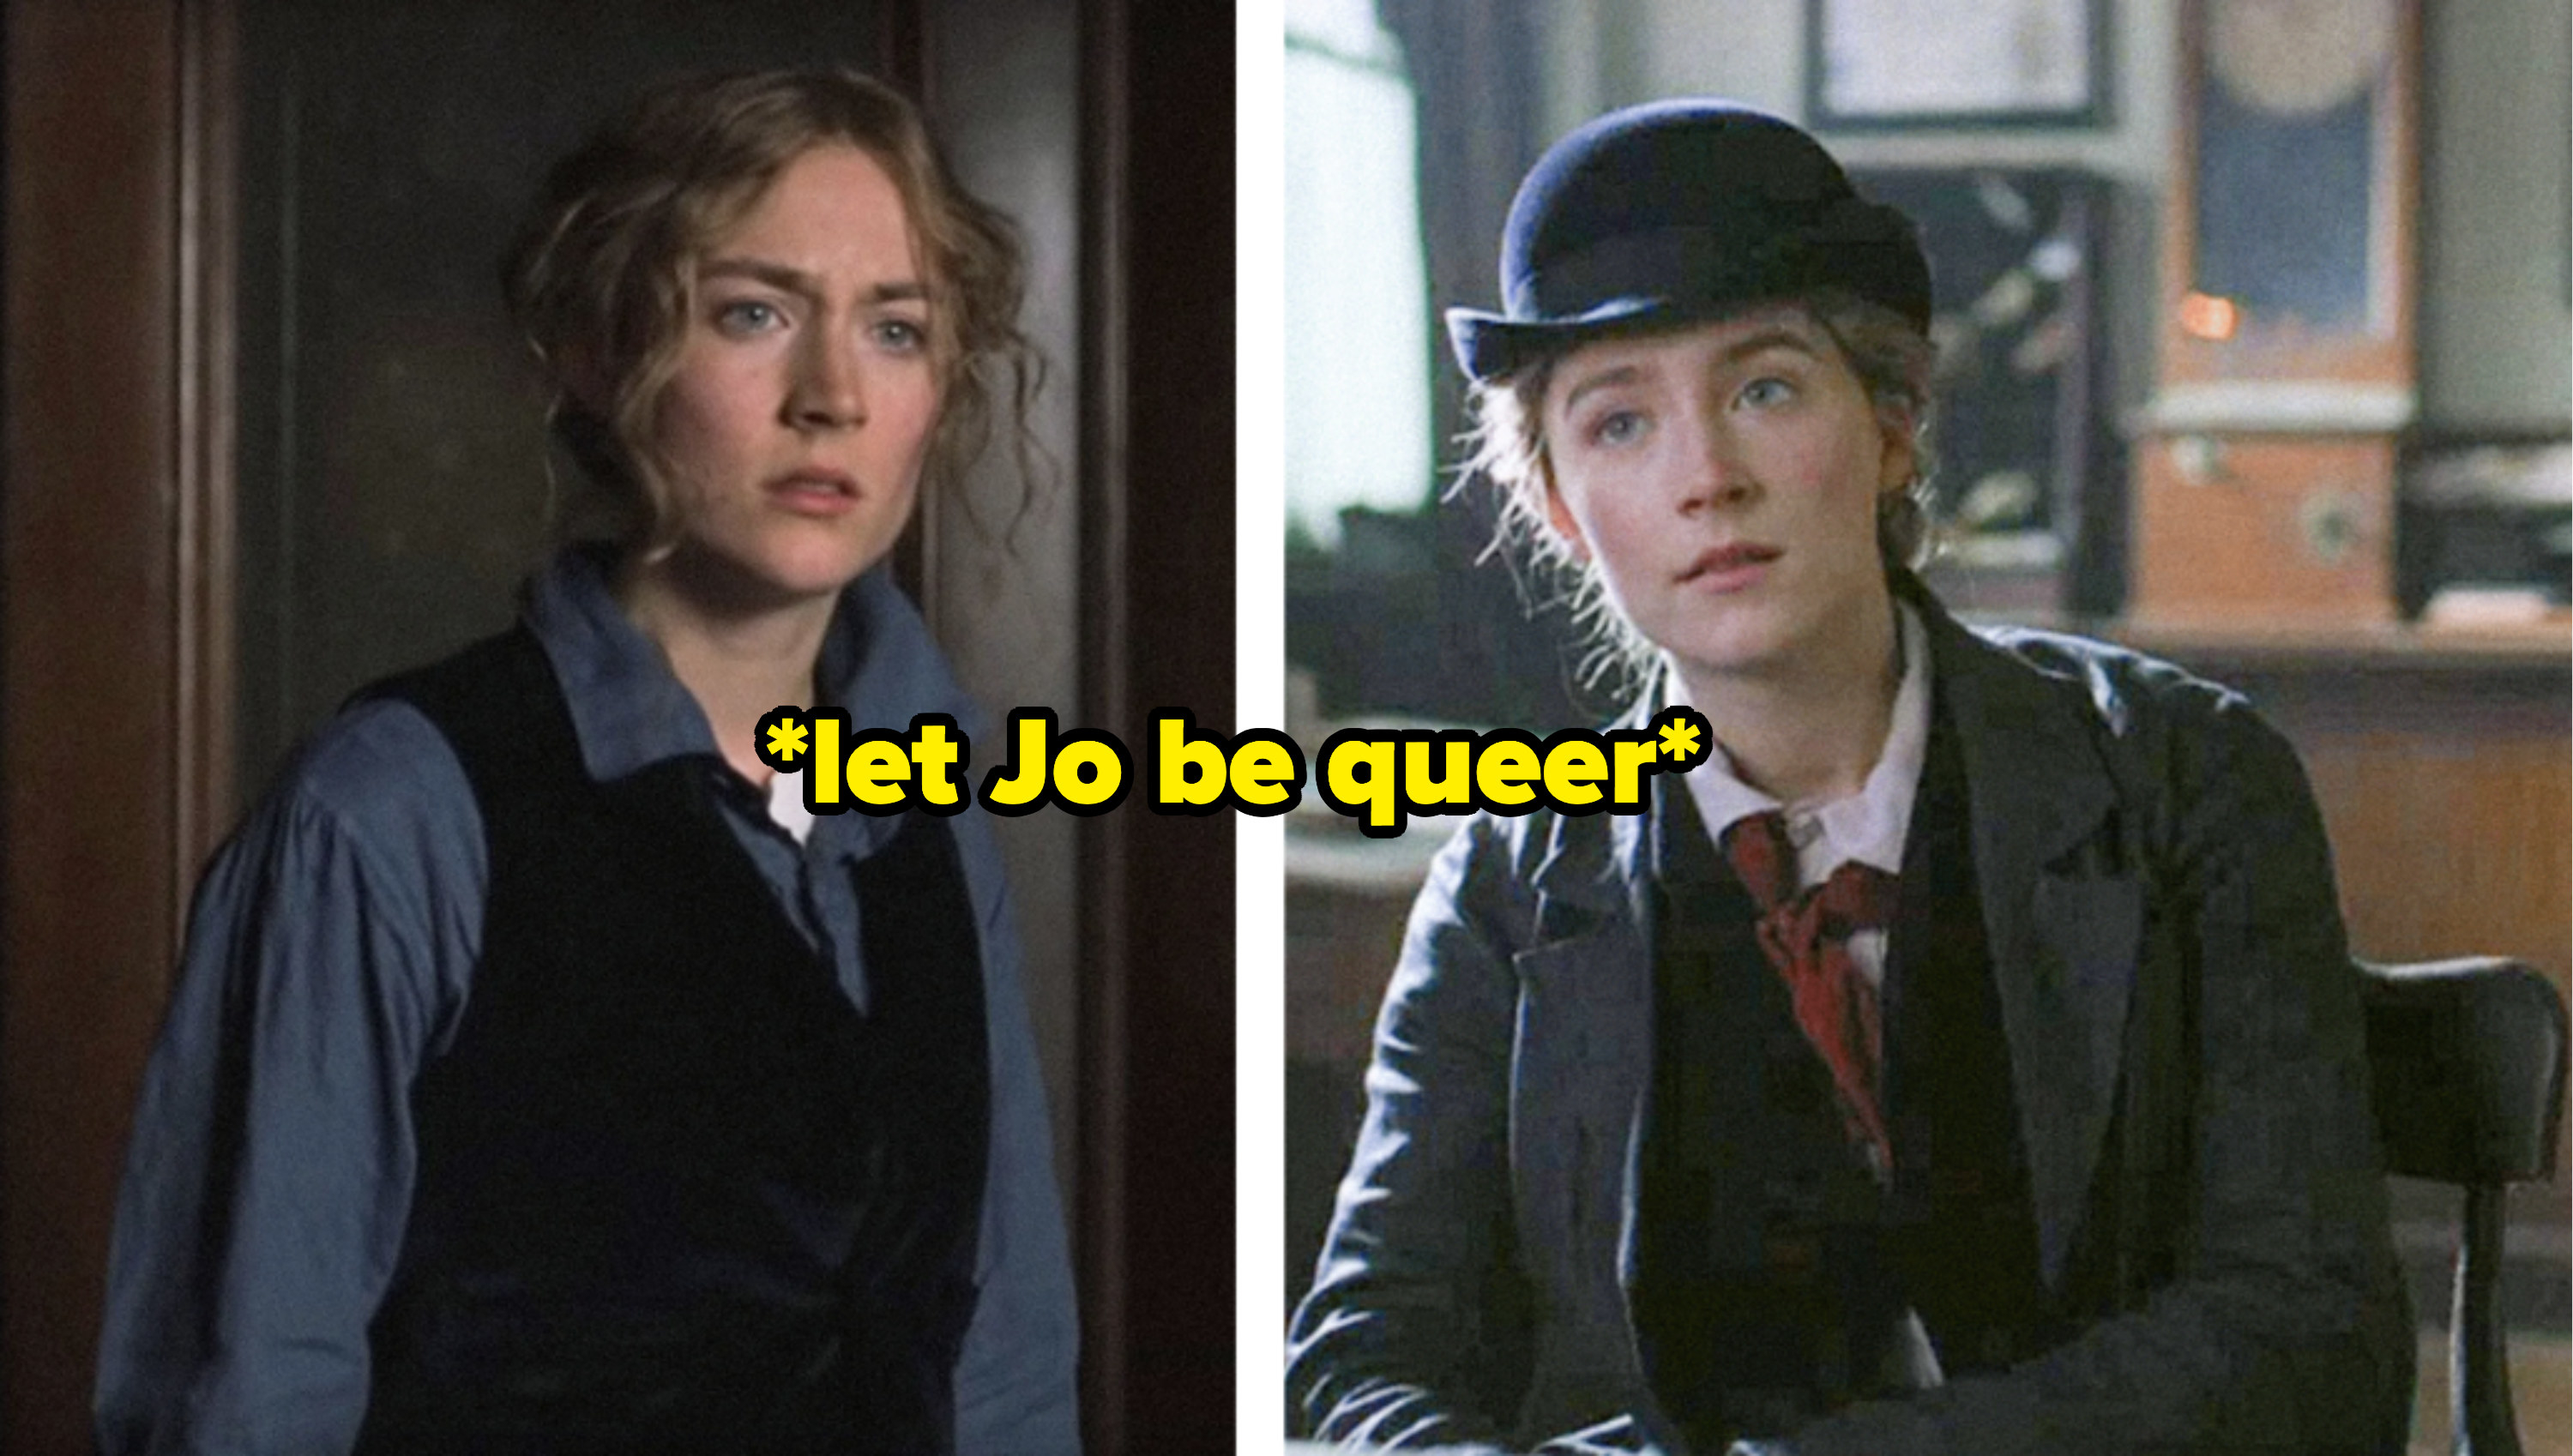 jo march from little woman 2019 dressed as a tomboy of the time